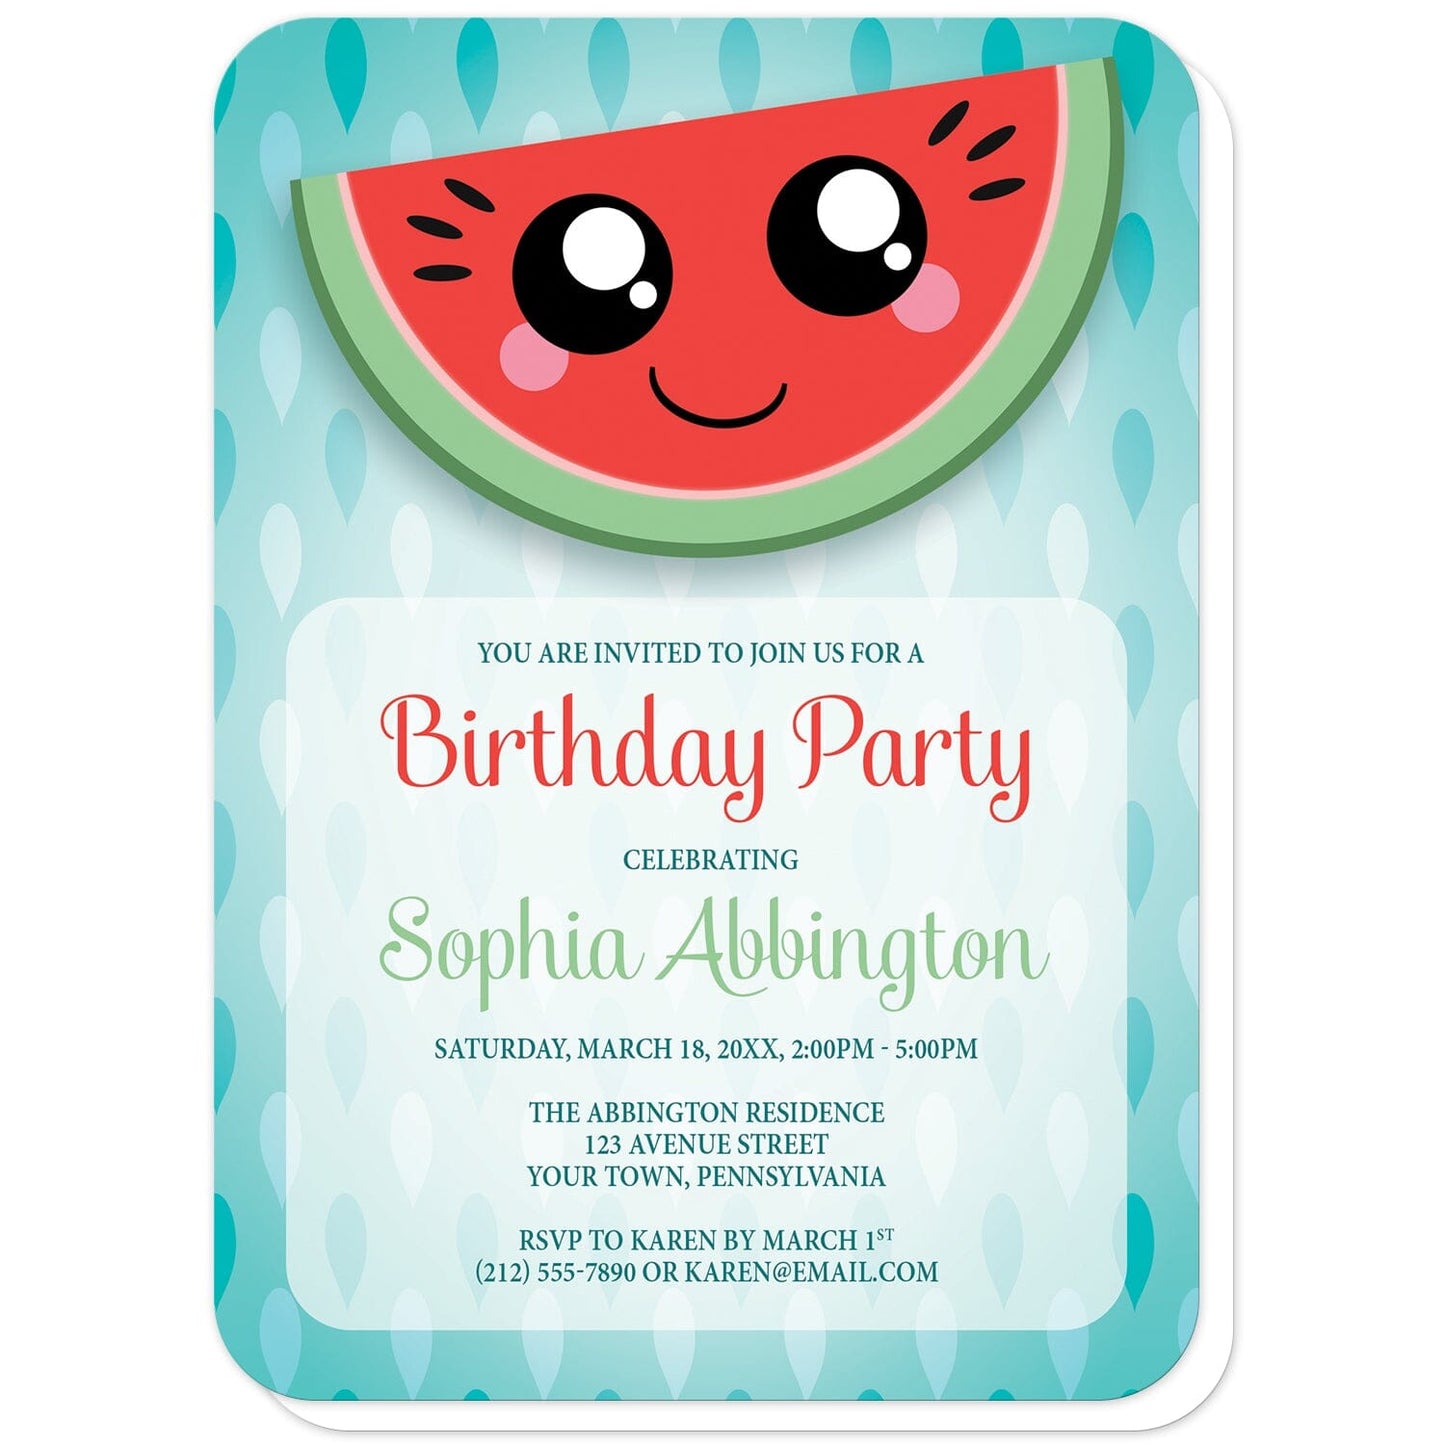 Smiling Watermelon Slice Birthday Party Invitations (with rounded corners) at Artistically Invited. Cute smiling watermelon slice birthday party invitations with a happy and smiling Kawaii-style red and green watermelon slice over a turquoise seed pattern background. The personalized information you provide for your birthday party celebration will be custom printed in red, green, and dark turquoise over a lightened frame area over the seeds pattern below the watermelon slice.